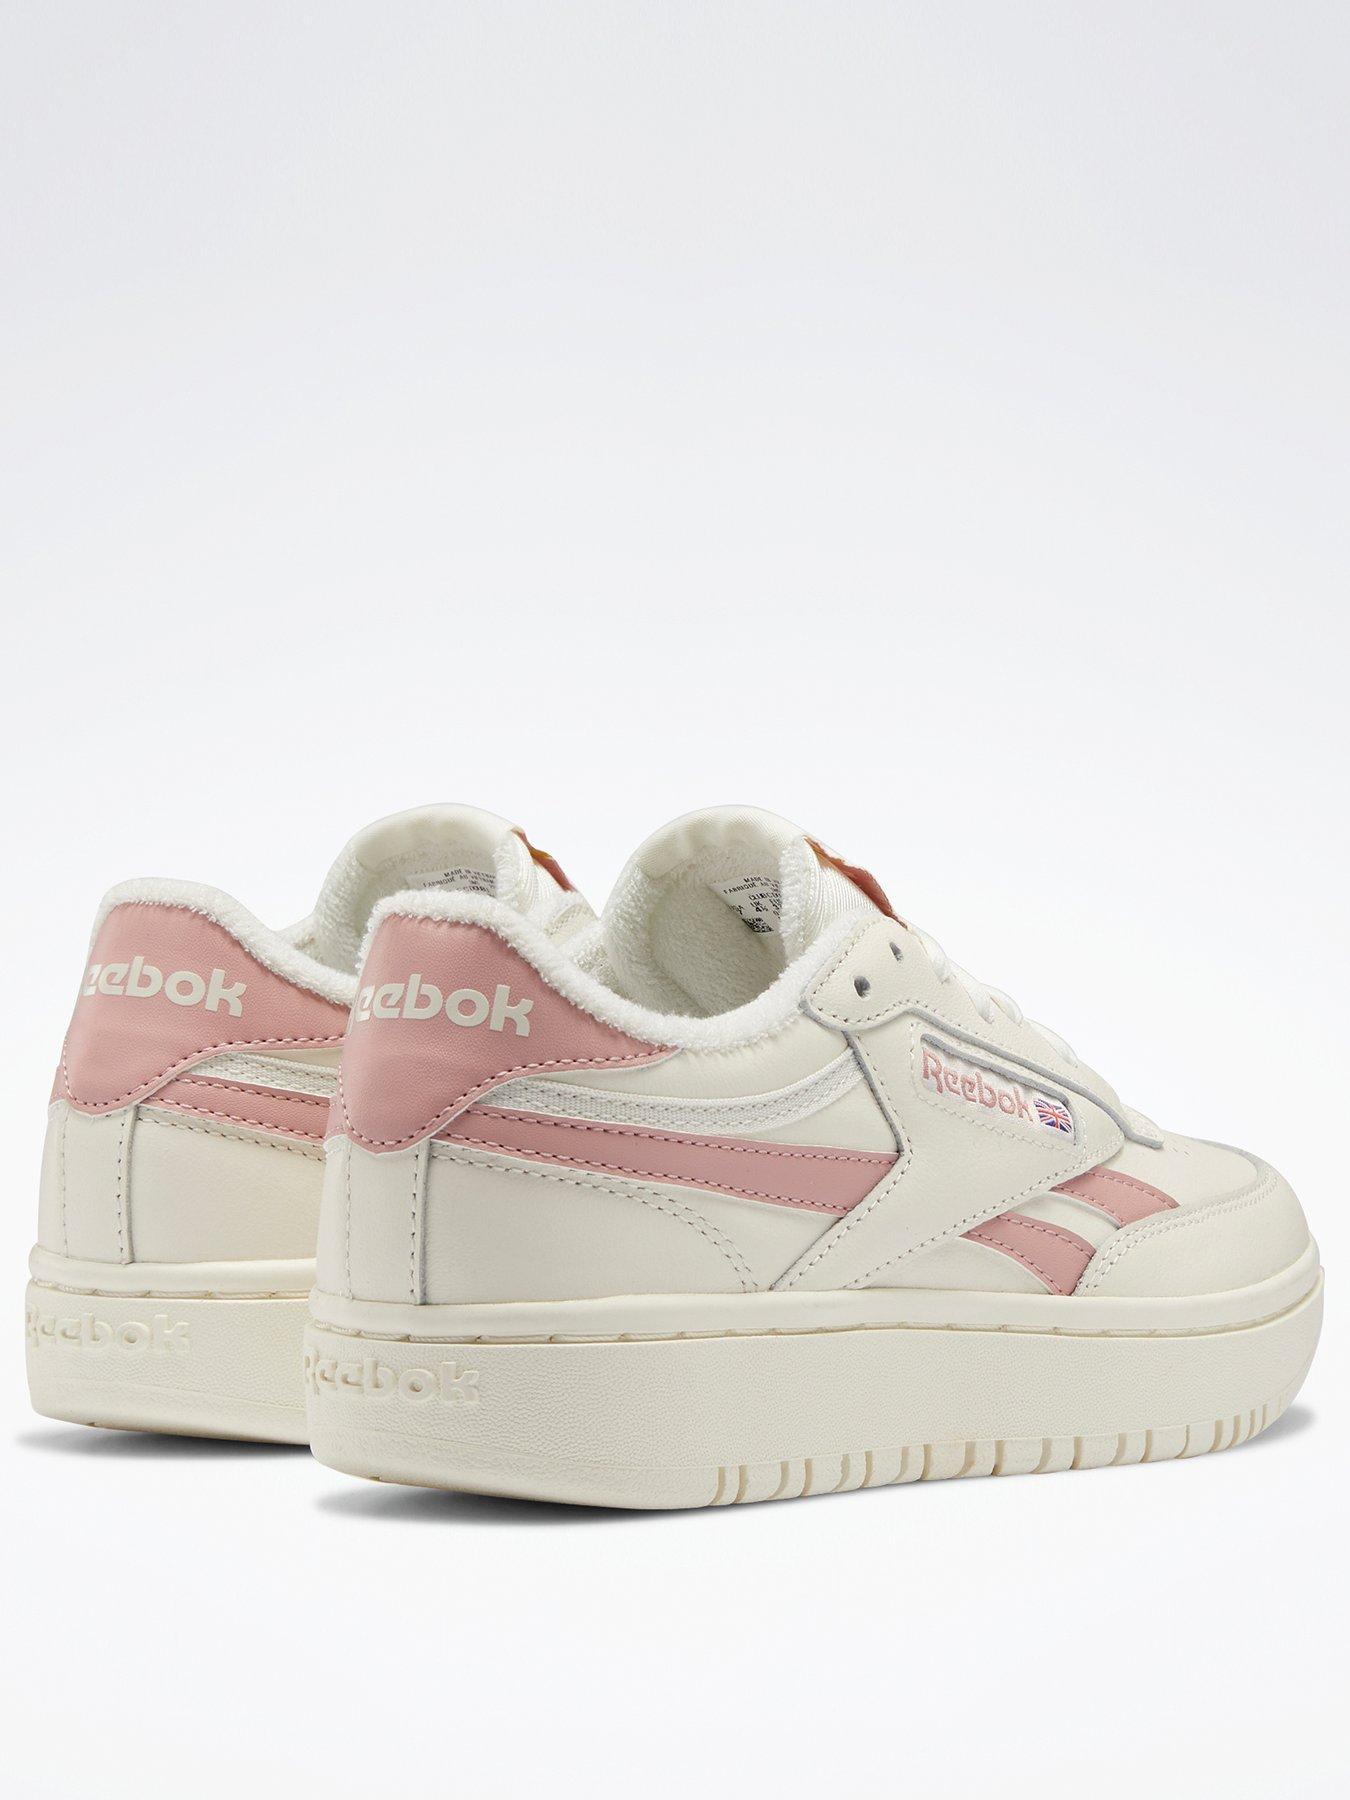 Reebok Club C Double Shoes - White/Pink | very.co.uk